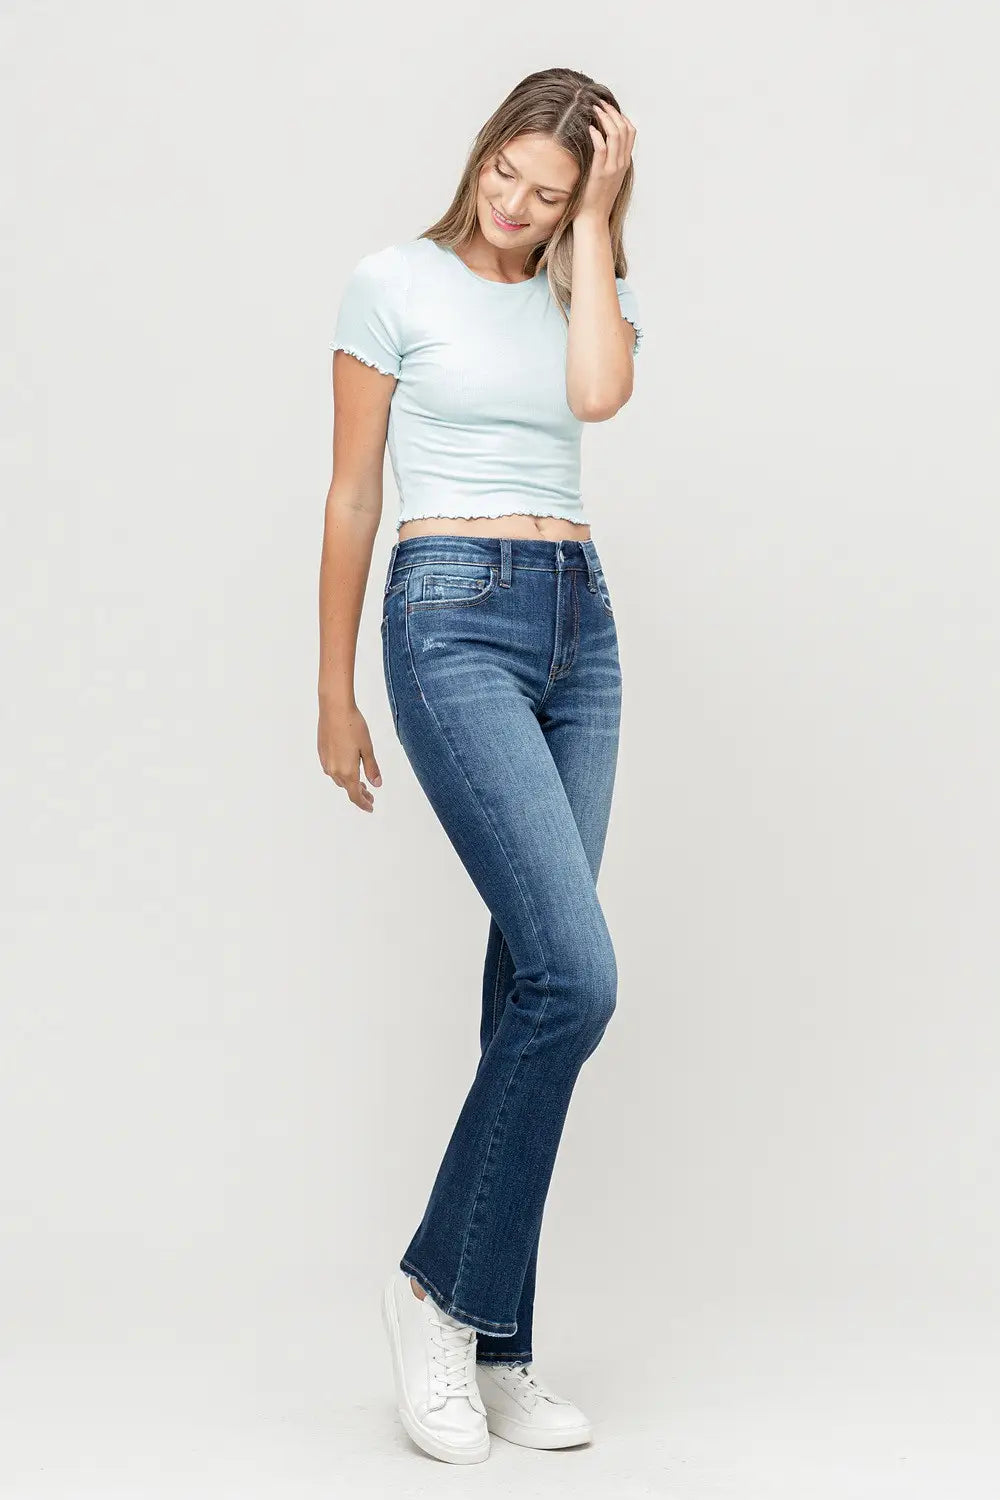 Mid rise flare - comfort stretch denim, flare below the knee, mid-waisted and fitted through the hip, 5 pockets, slightly destruction at the hem